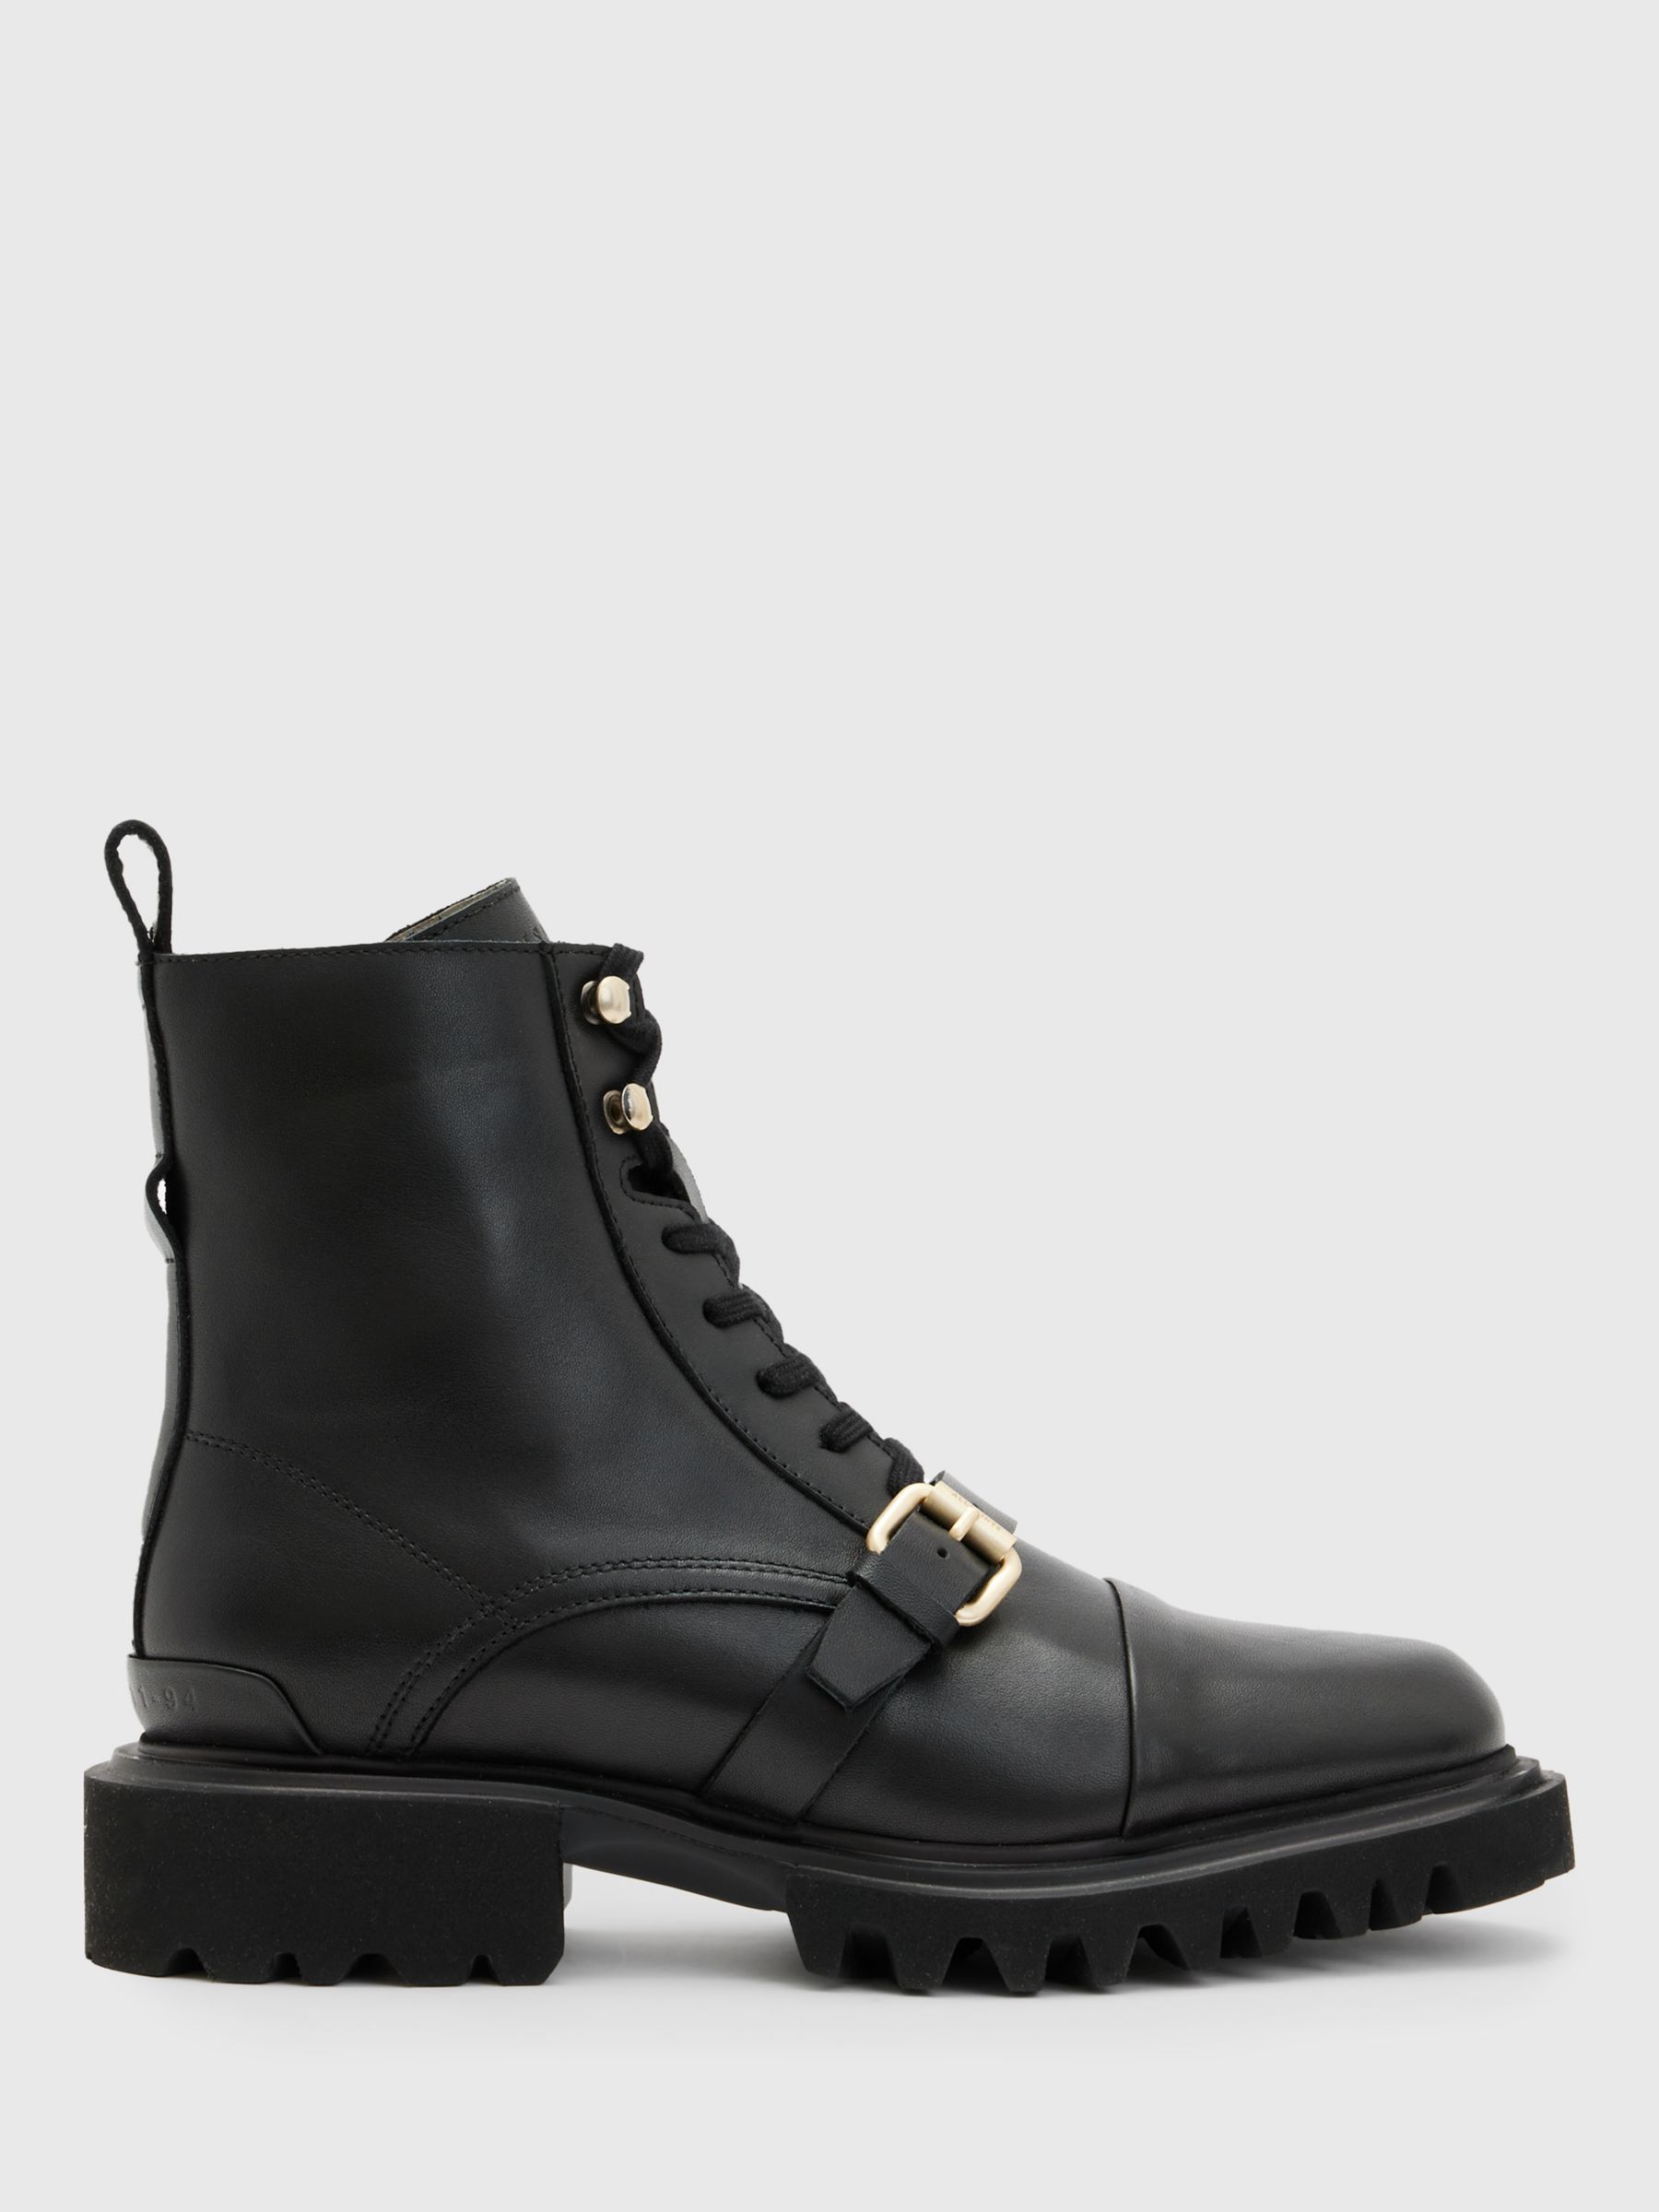 AllSaints Tori Leather Lace Up Ankle Boots, Black/Warm Brass at John ...